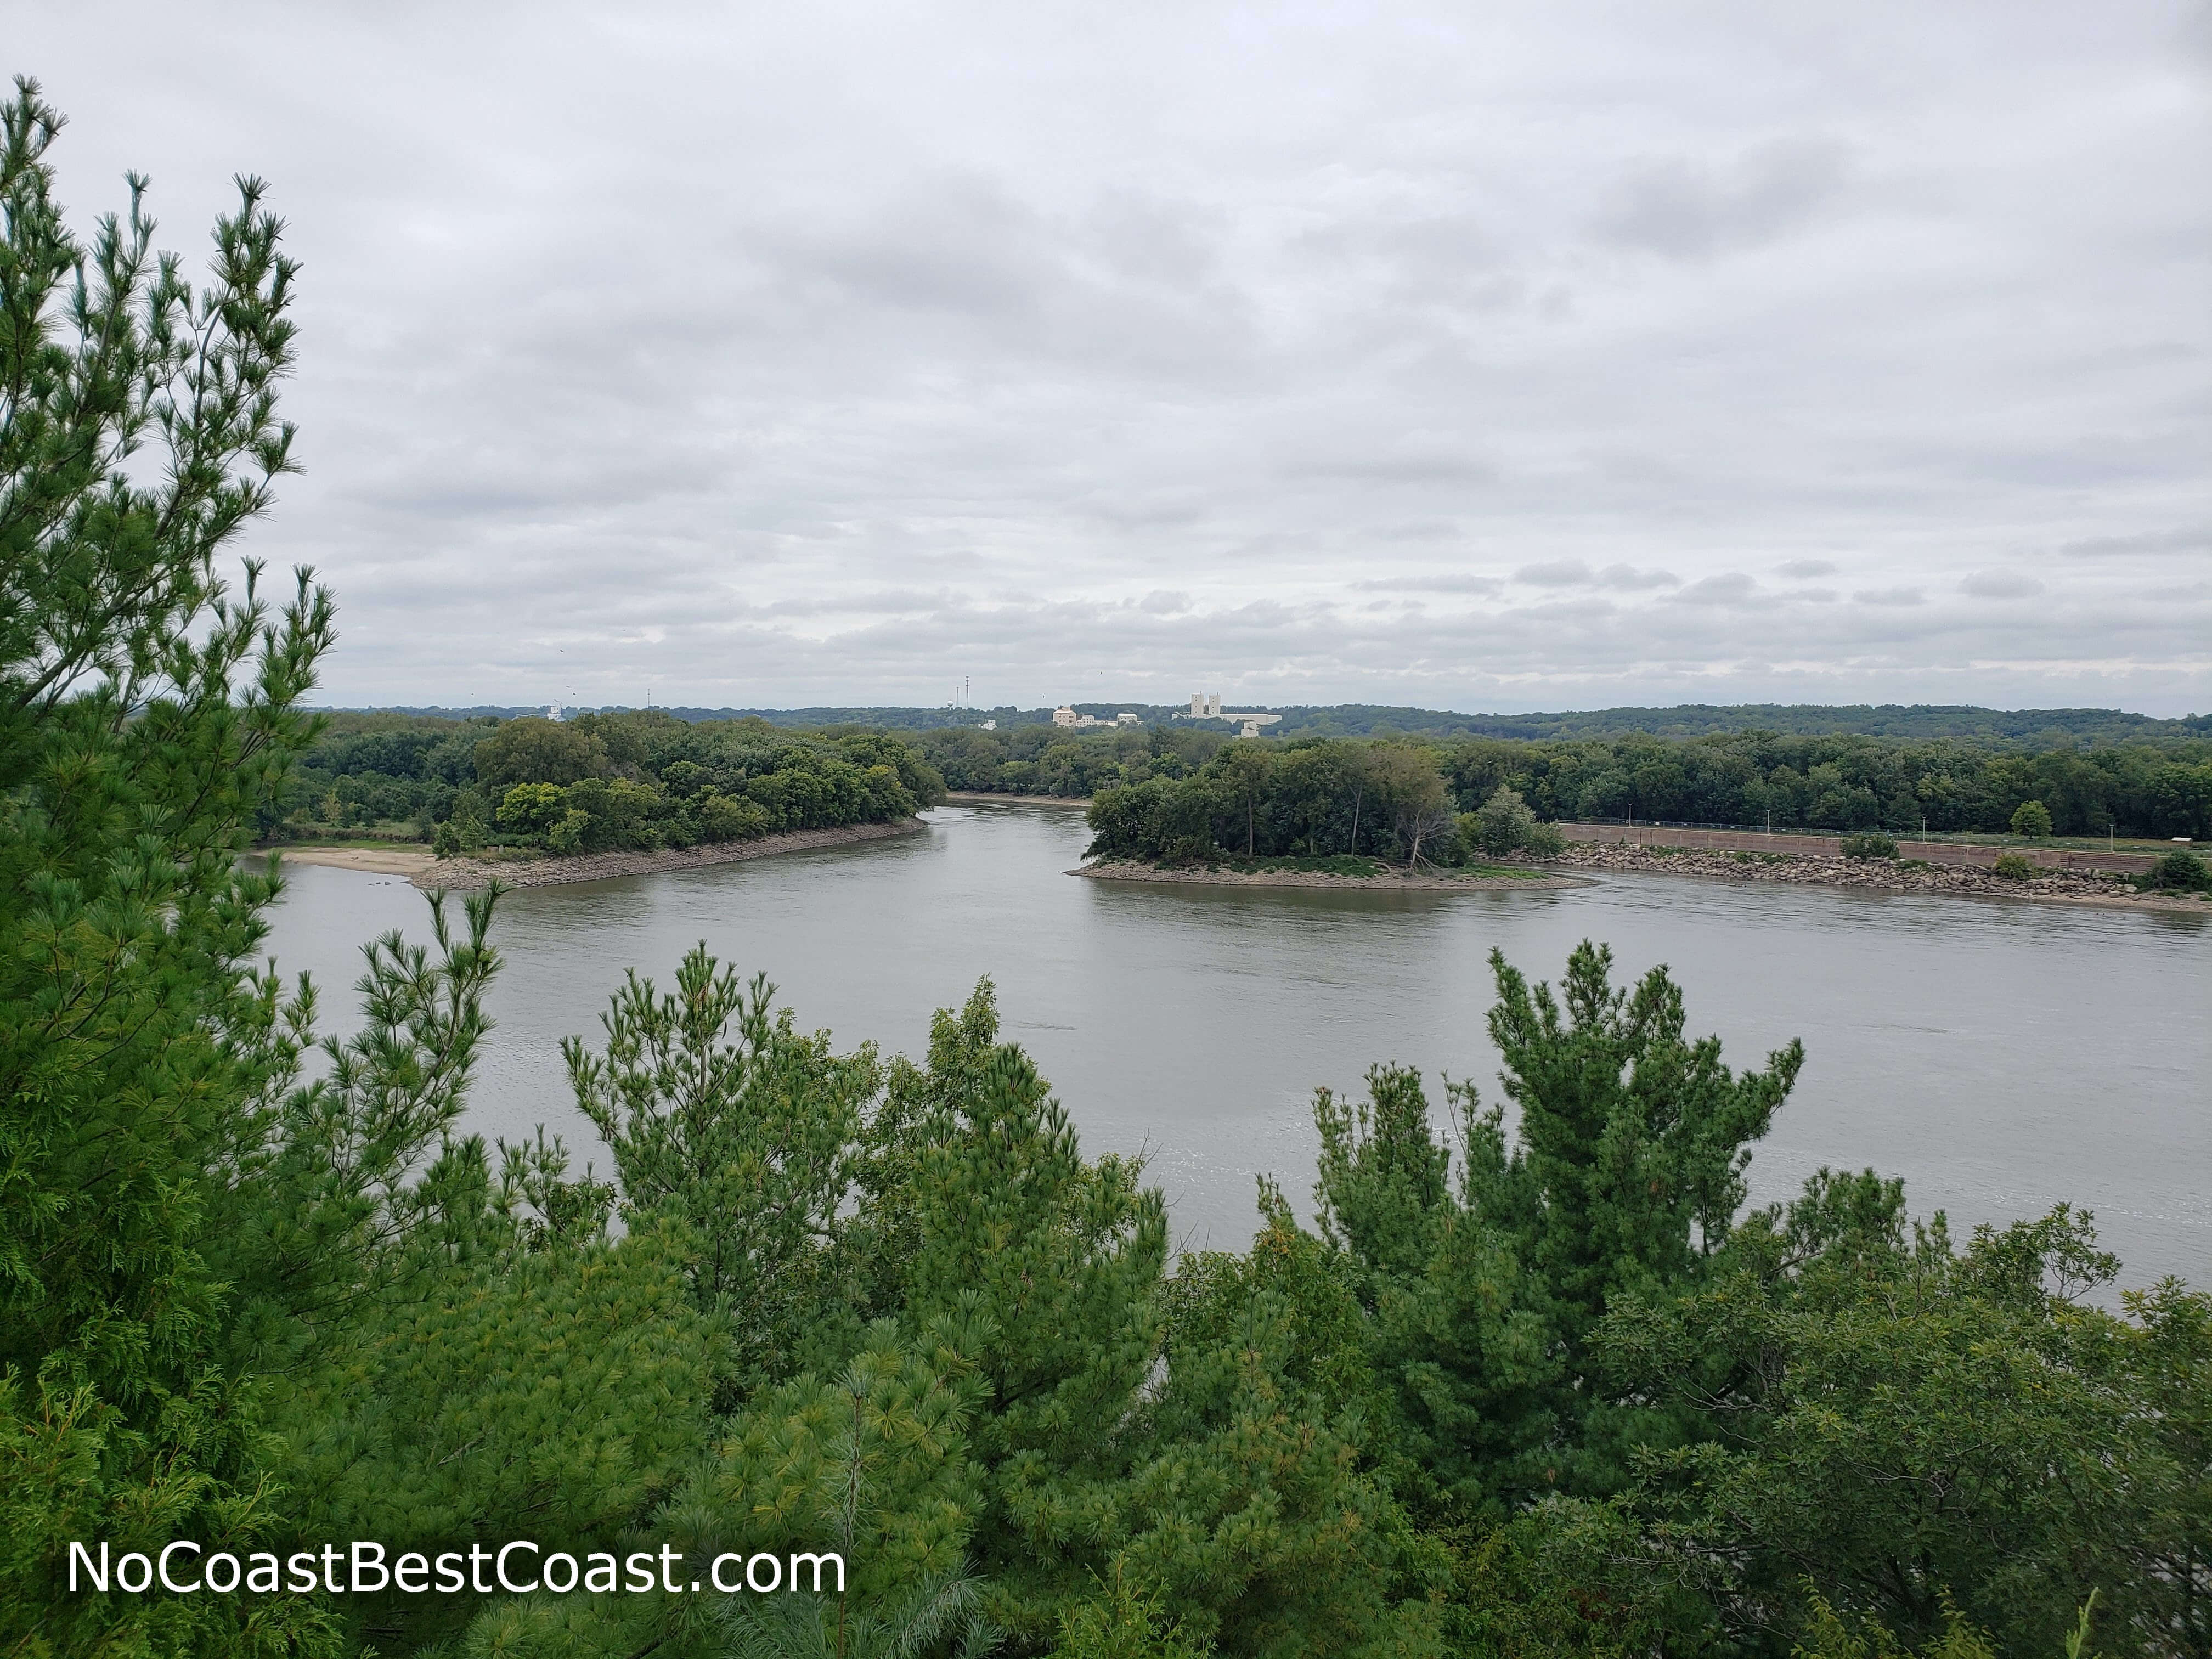 Leopold and Plum Island as seen from Lover's Leap